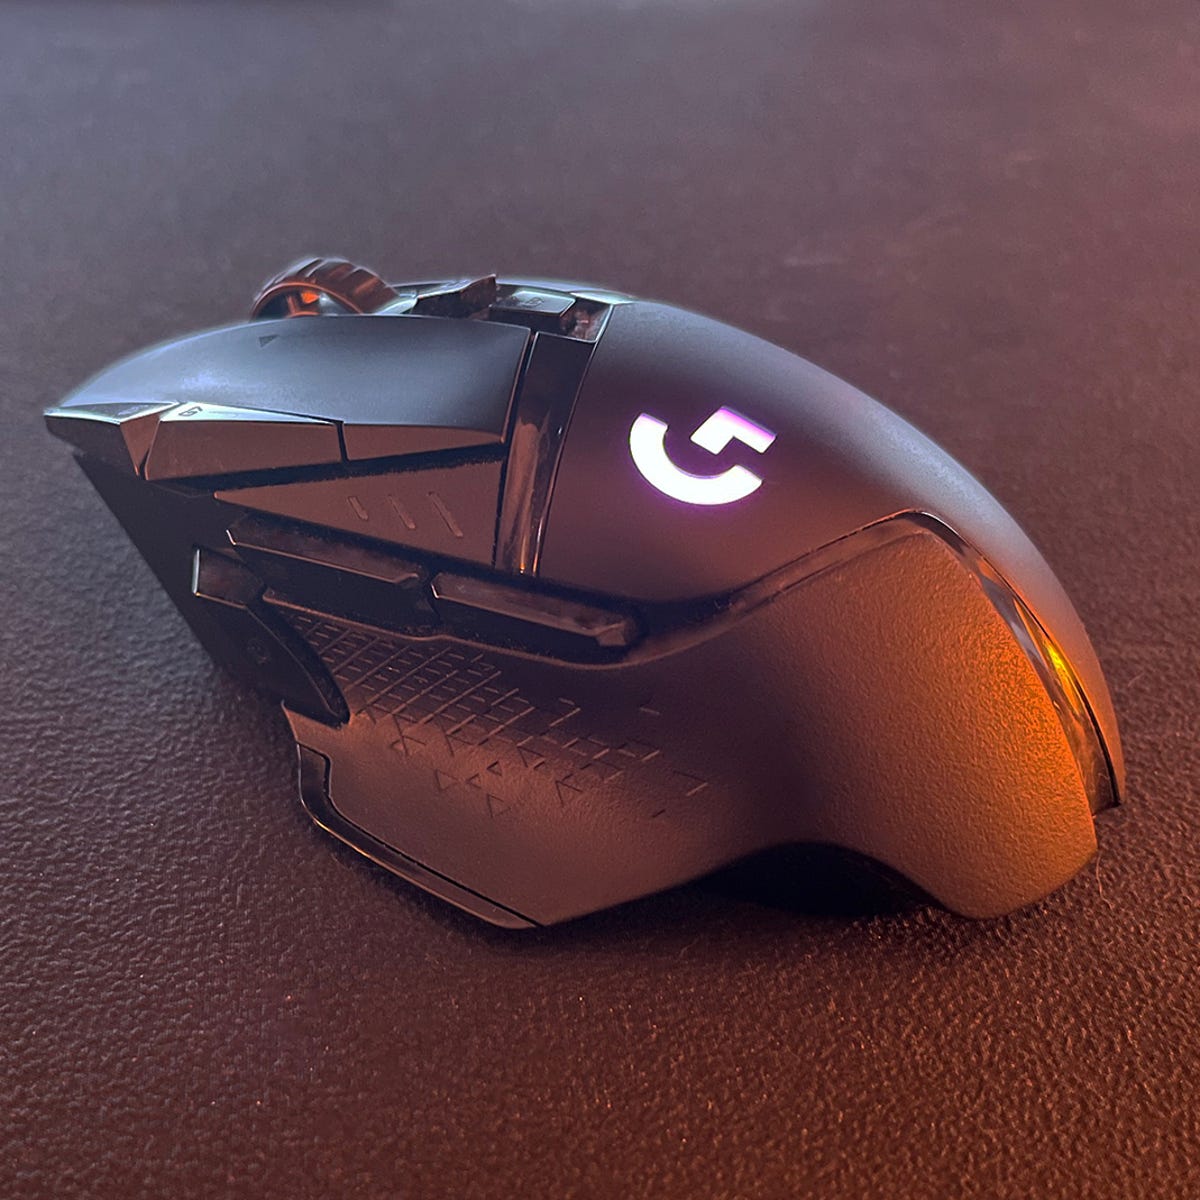 Logitech G502 Lightspeed review: The Swiss Army knife of mice